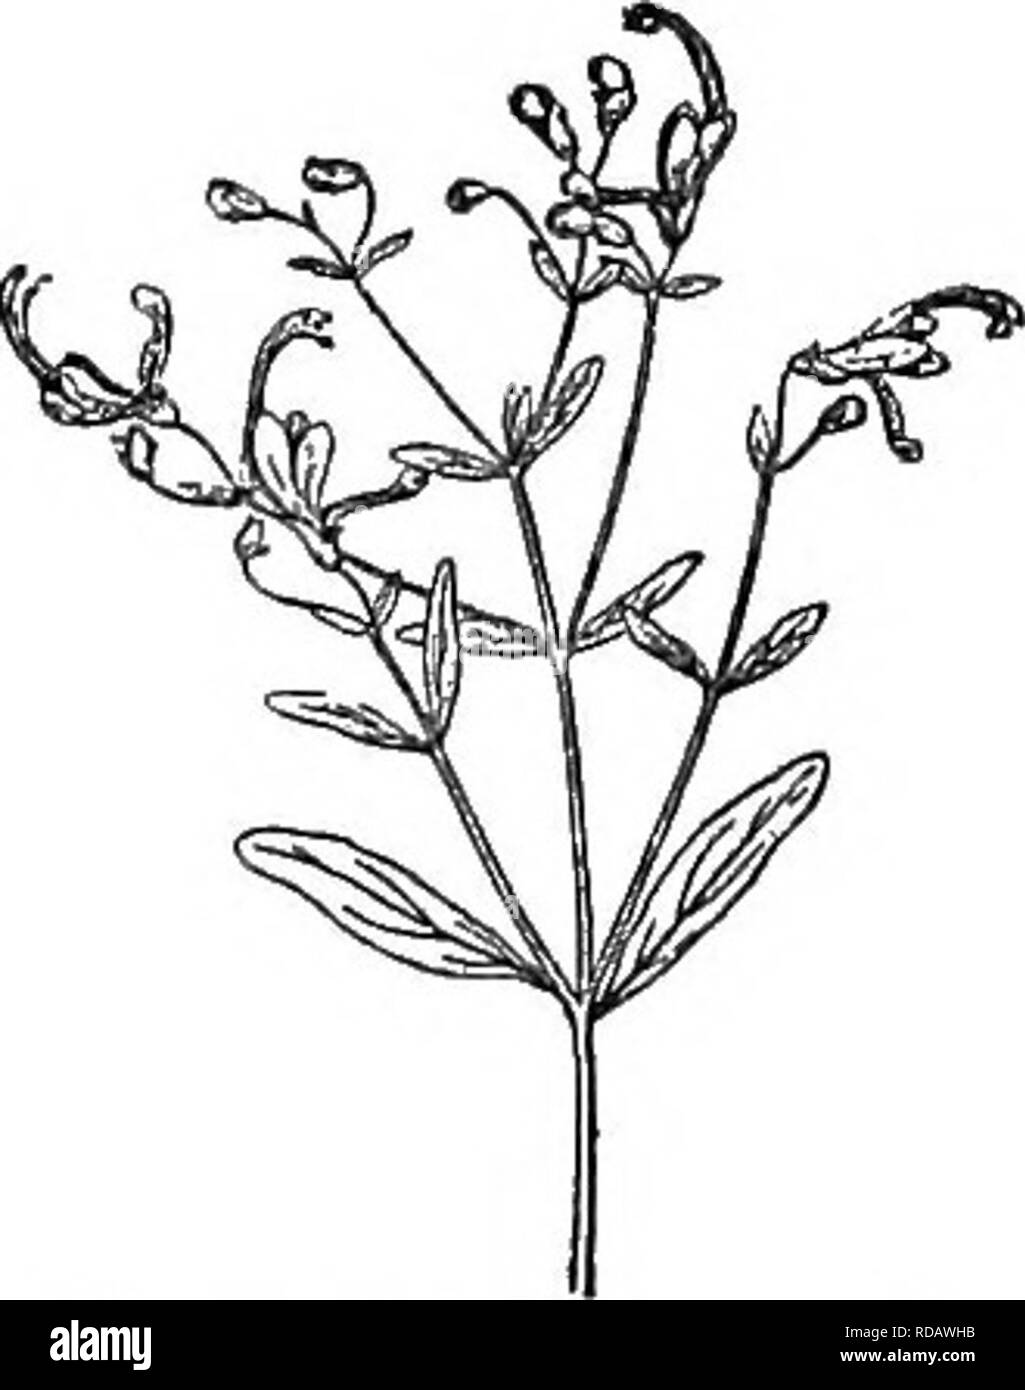 . Gray's new manual of botany. A handbook of the flowering plants and ferns of the central and northeastern United States and adjacent Canada. Botany. (J94 LABIATAE (MINT FAMILY). ments; anther-cells divergent and at length confluent. — Low annuals, some- what clammy-glandular and balsamic, branched, with entire leaves, and mostly solitary 1-flowered pedicels terminating the branches, becoming lateral by the production of axillary branch- lets, and the flower appearing to be reversed, namely, the short teeth of the calyx upward, etc. Corolla blue, varying to pink, rarely white, small; fl. in s Stock Photo